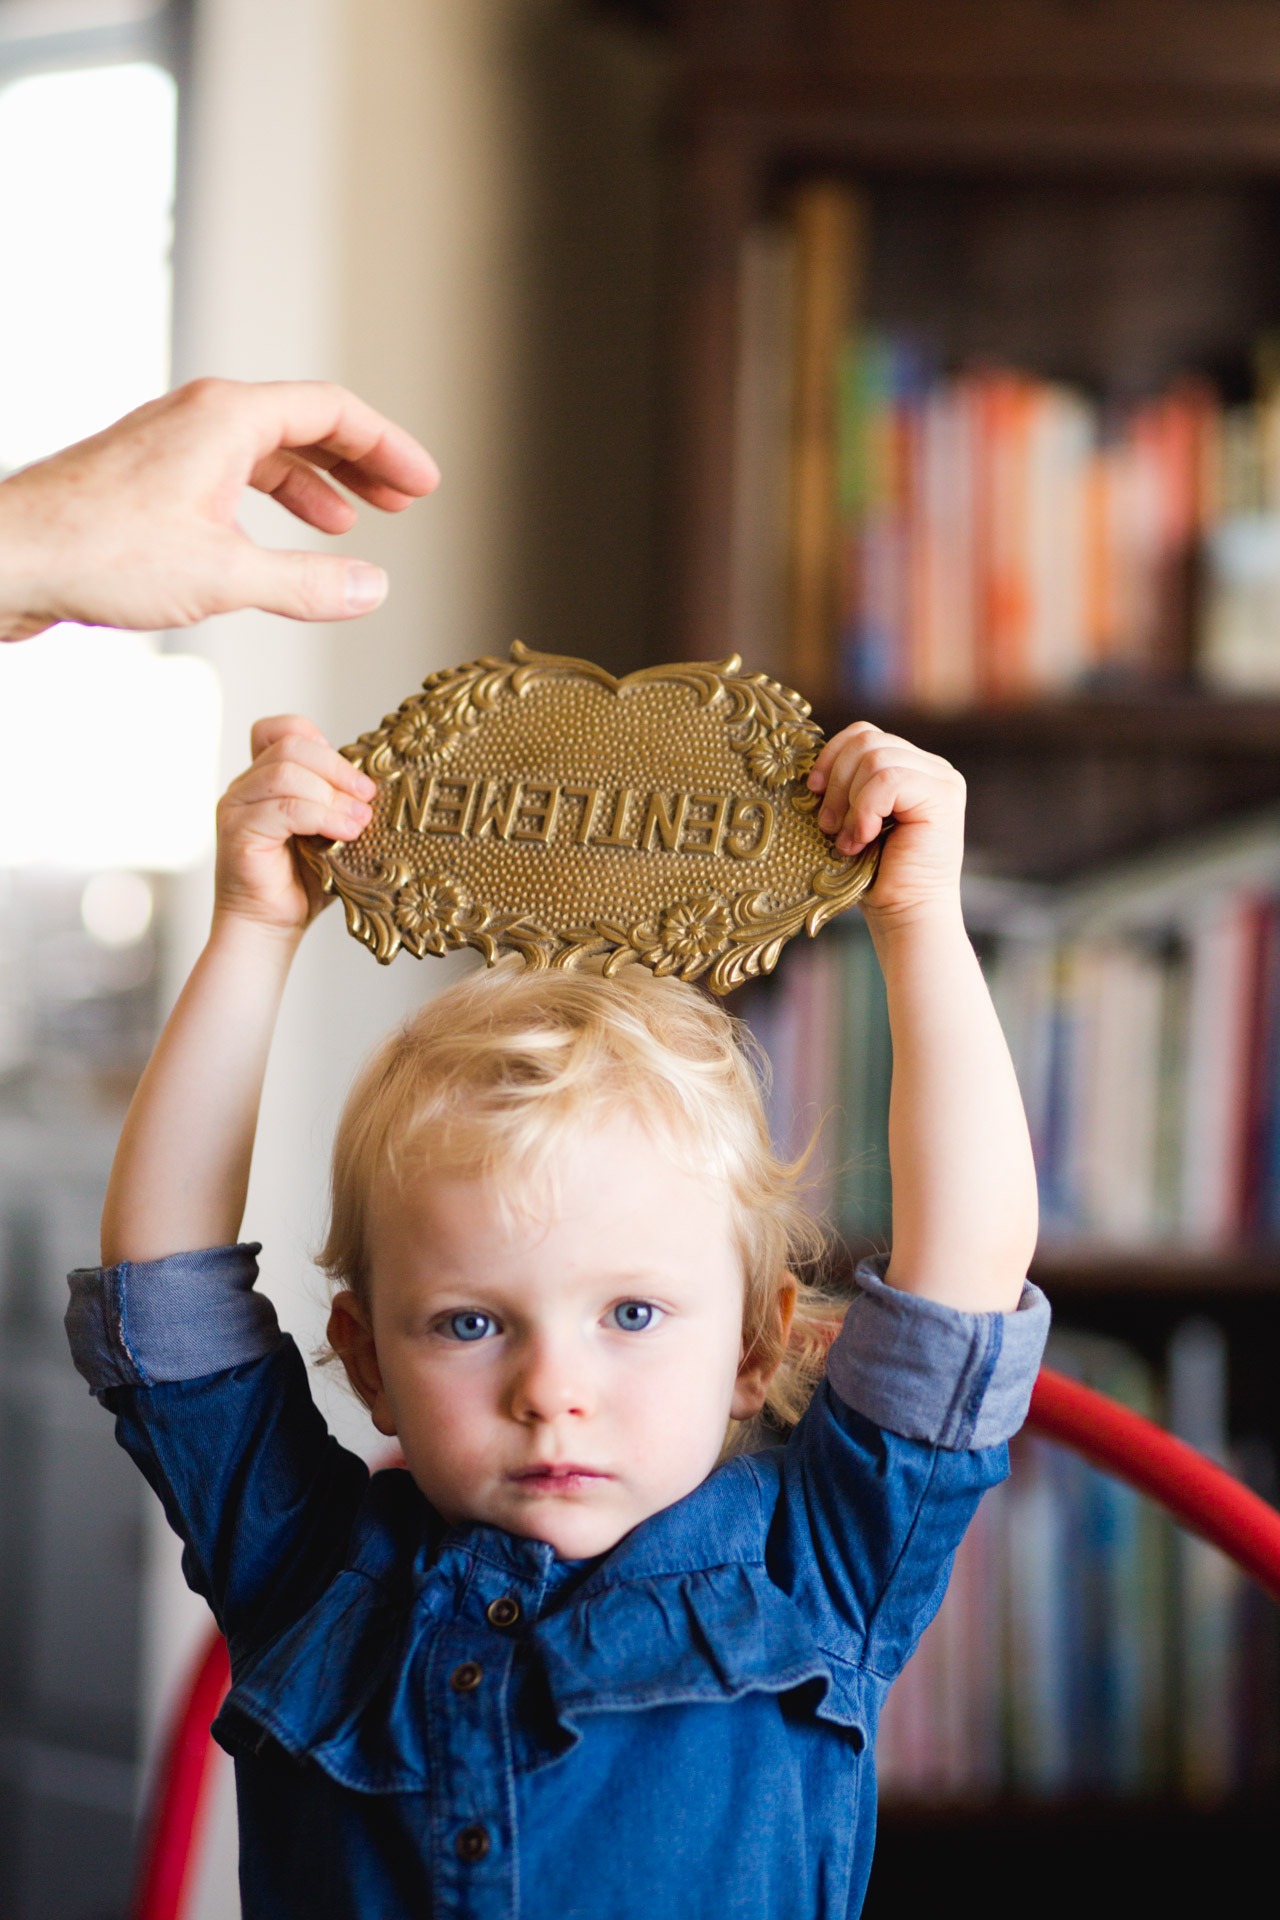 A young girl holds up a metal sign during a photo session at her home